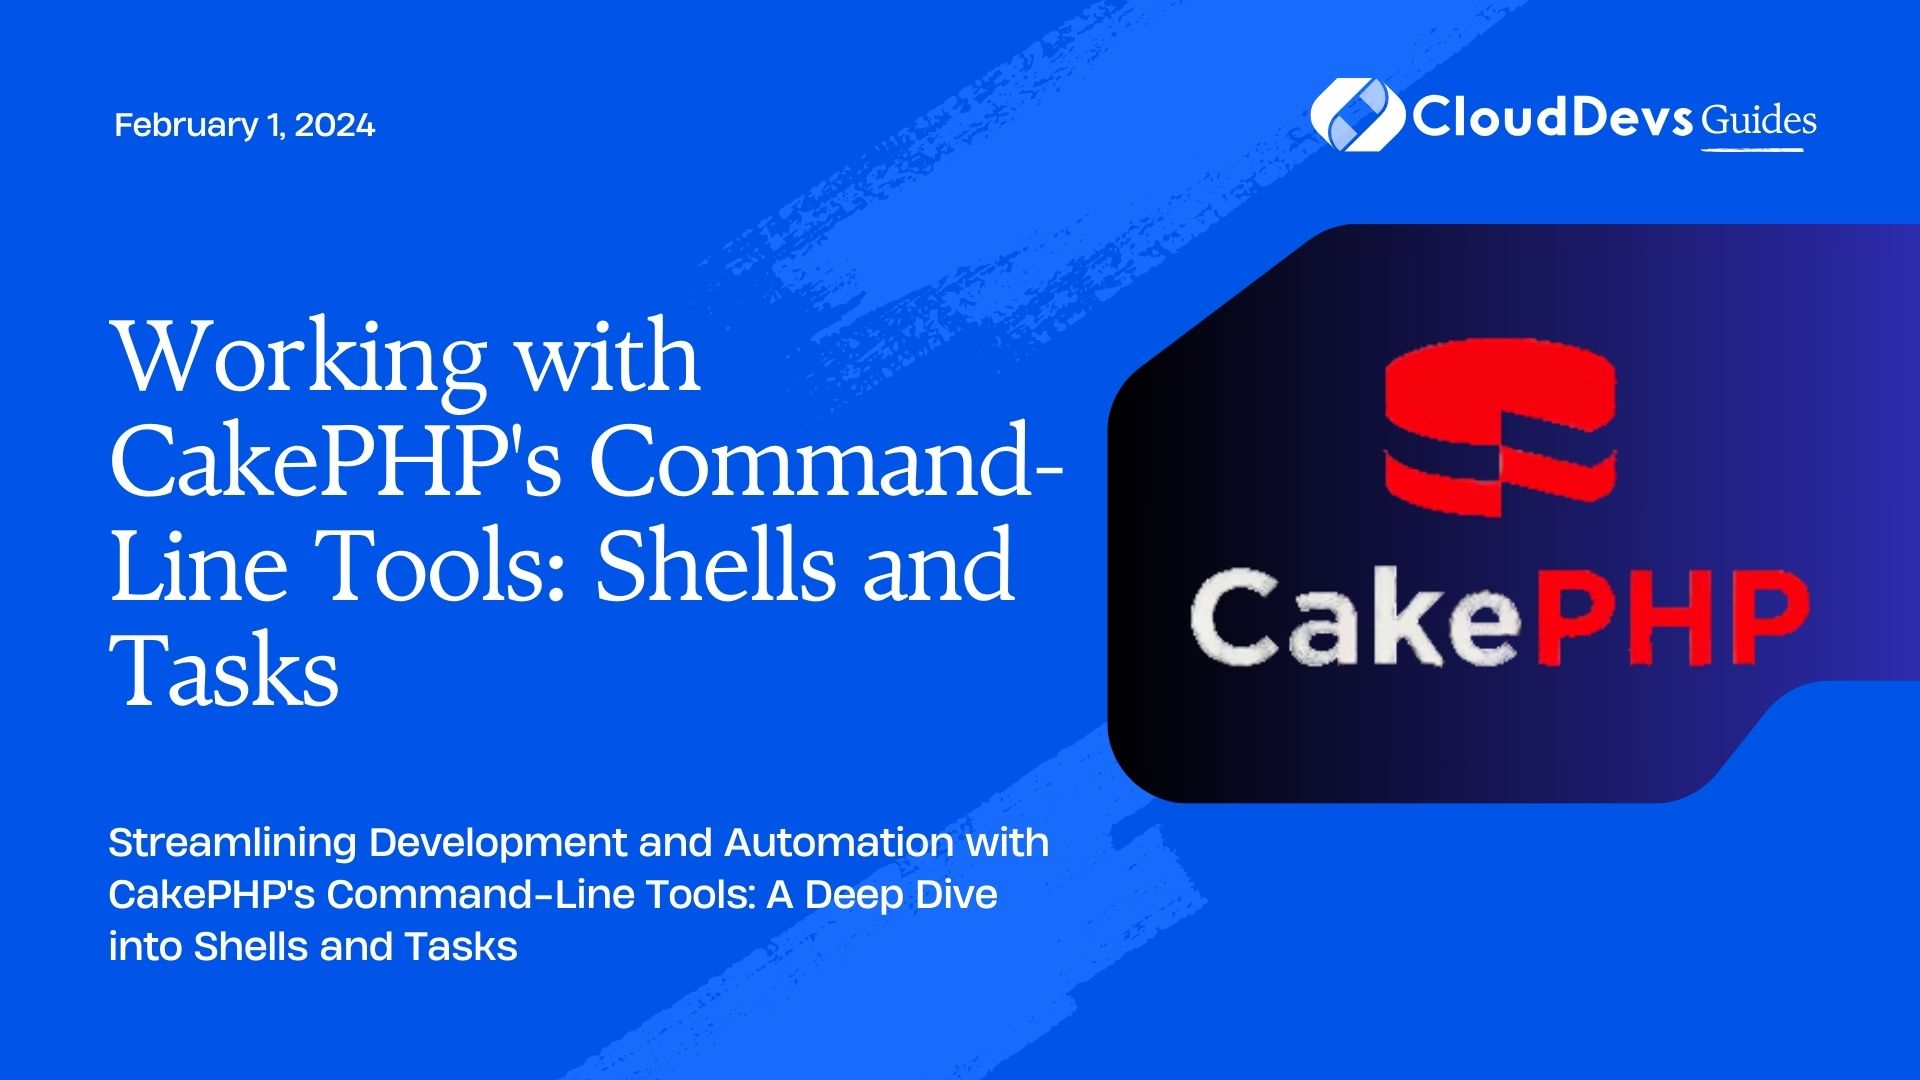 Working with CakePHP's Command-Line Tools: Shells and Tasks